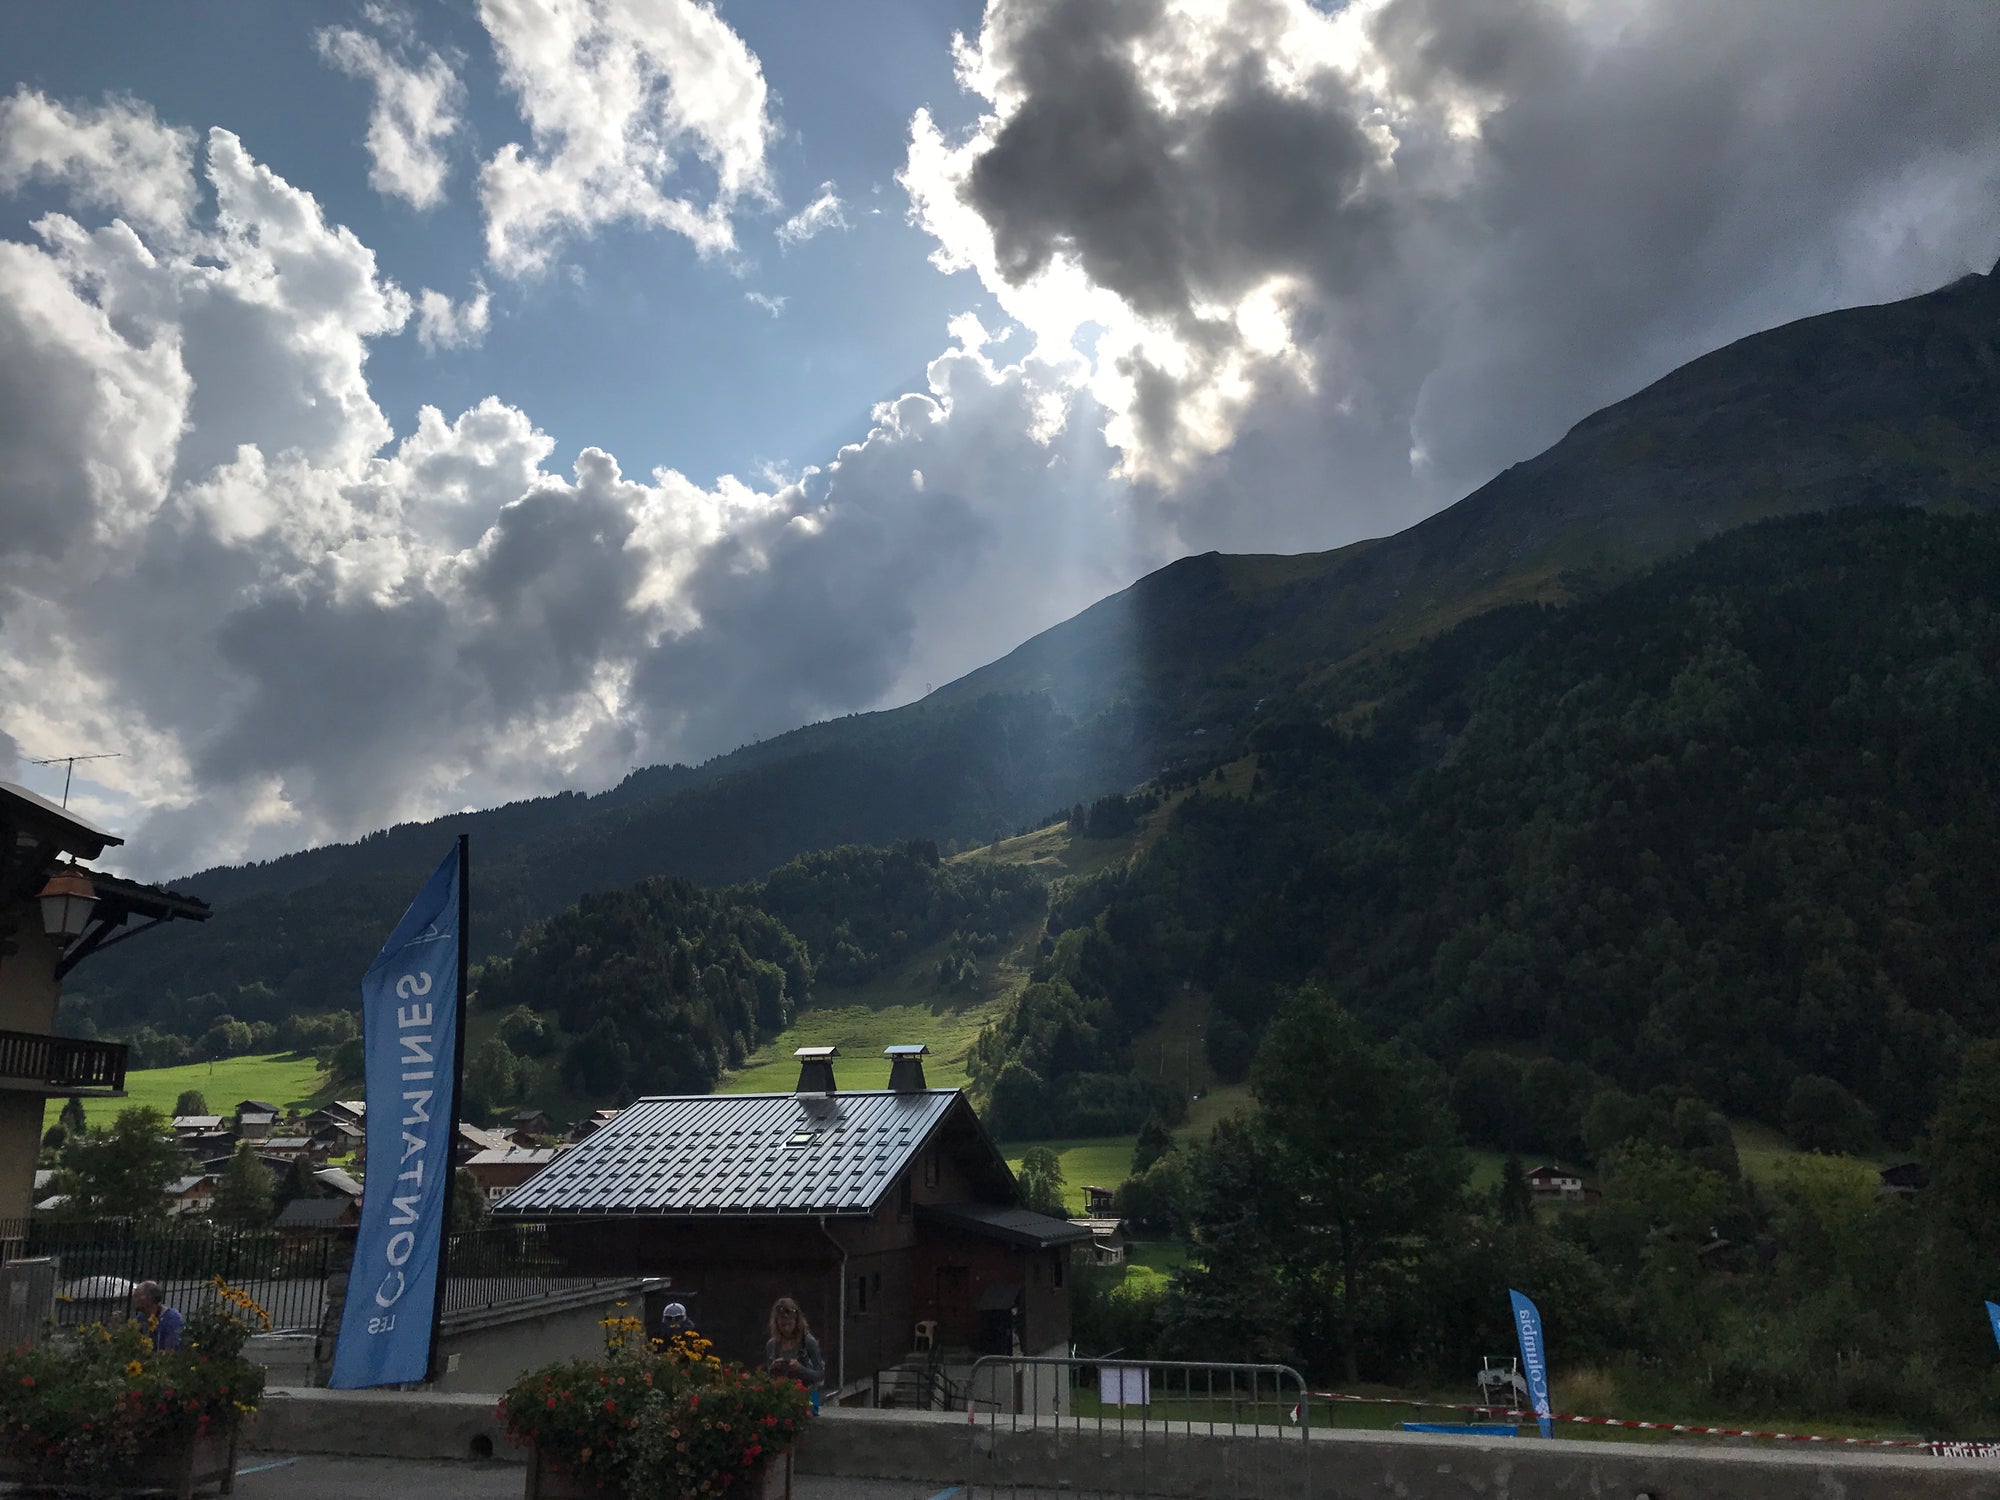 UTMB Photo Essay: The Calm Before the Storm